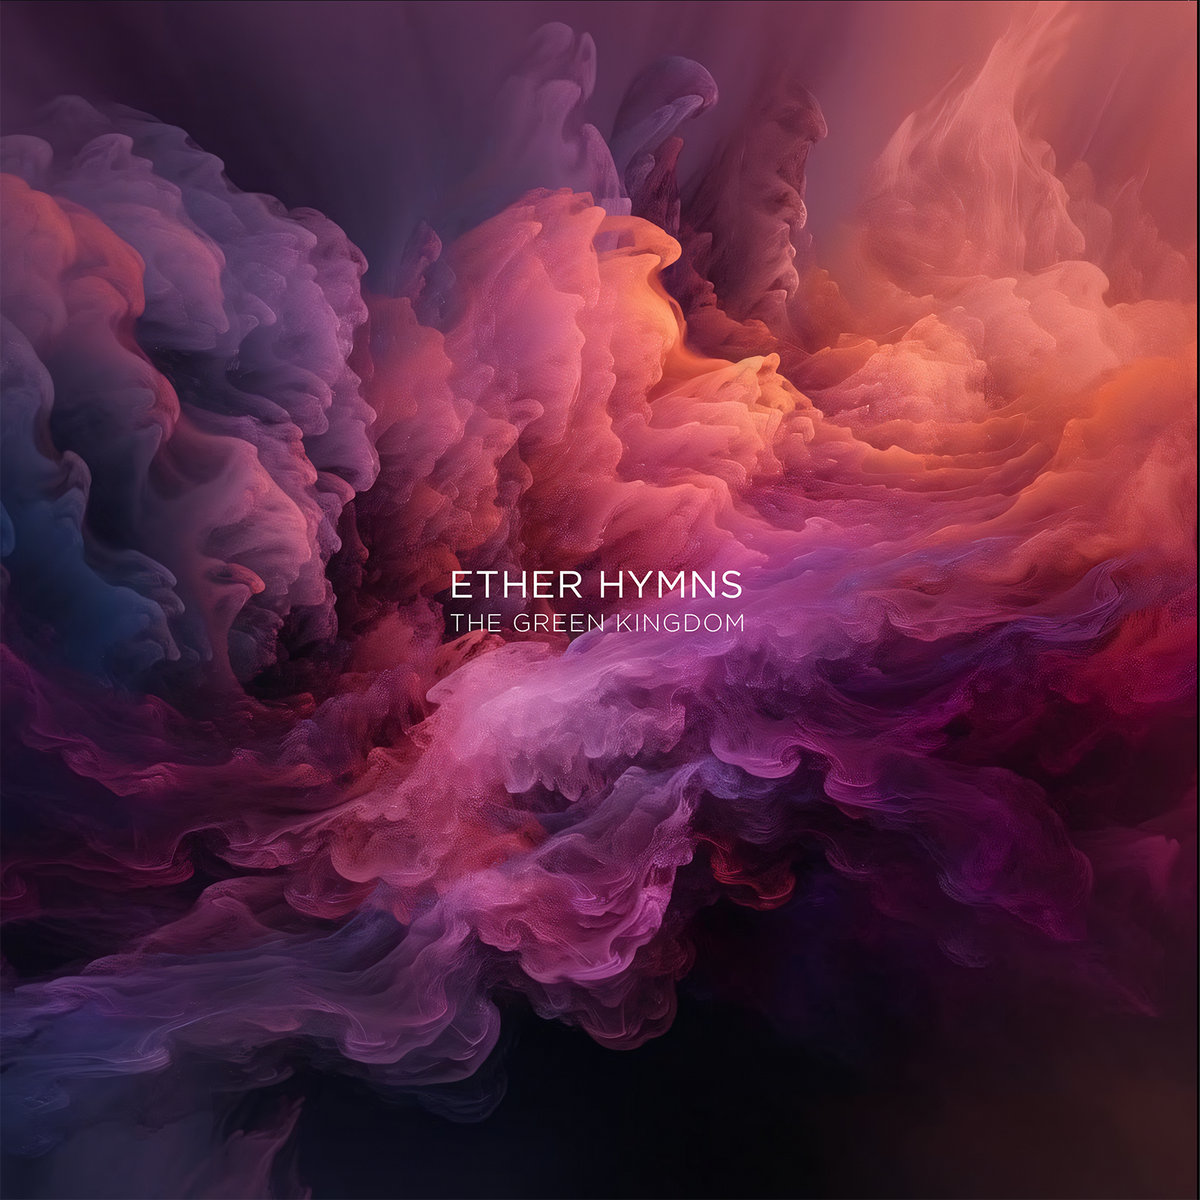 [album cover art] The Green Kingdom – Ether Hymns